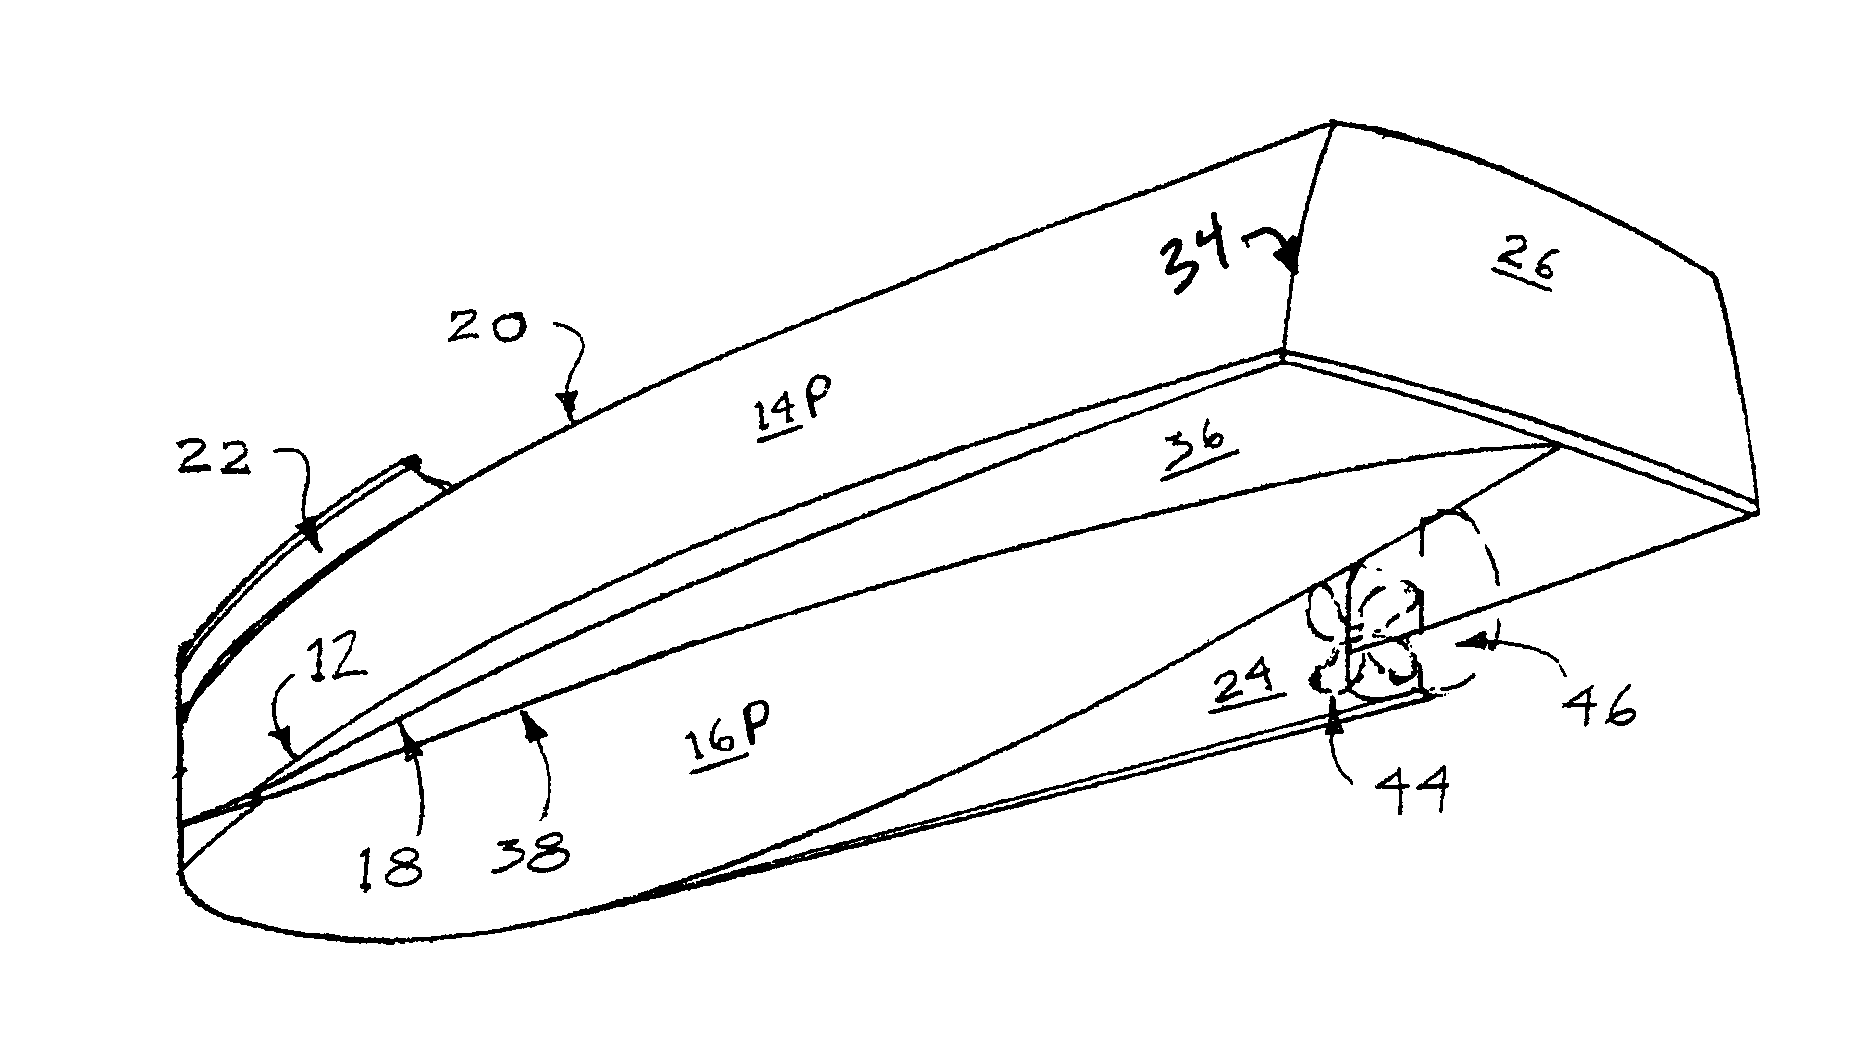 Compound displacement wave form hull design for green vessels